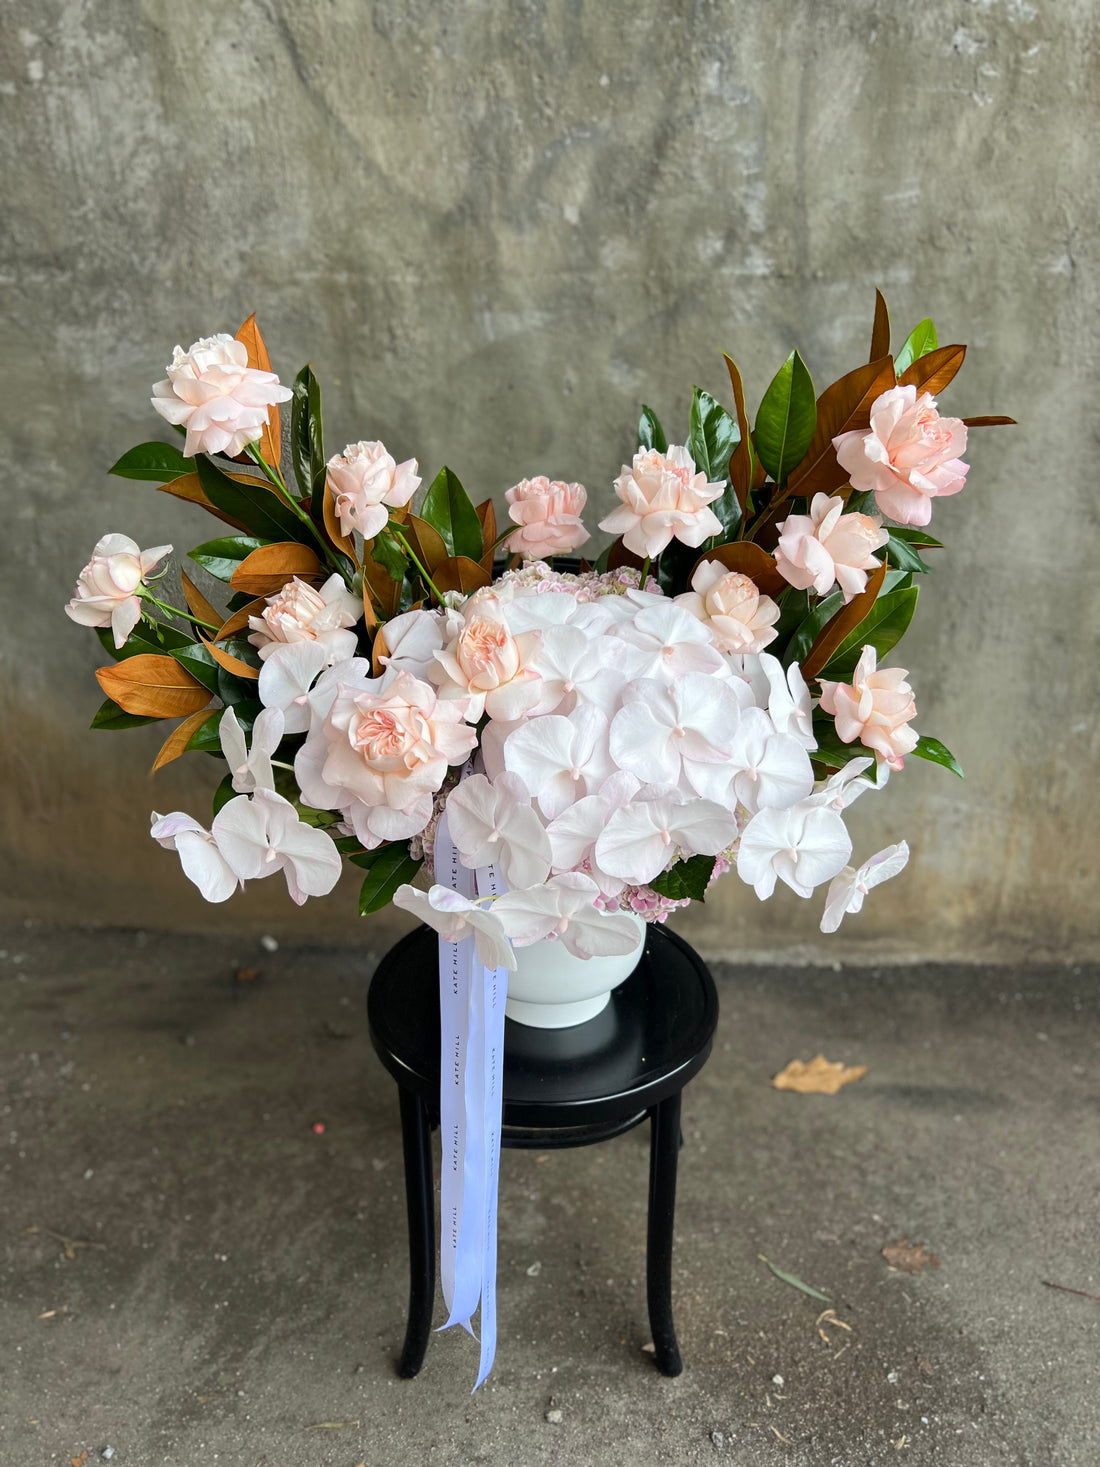 Large and luxe white ceramic vase displaying luxe blush pink flowers and magnolia foliage. Design sitting on a black bentwood chair with concrete wall behind.